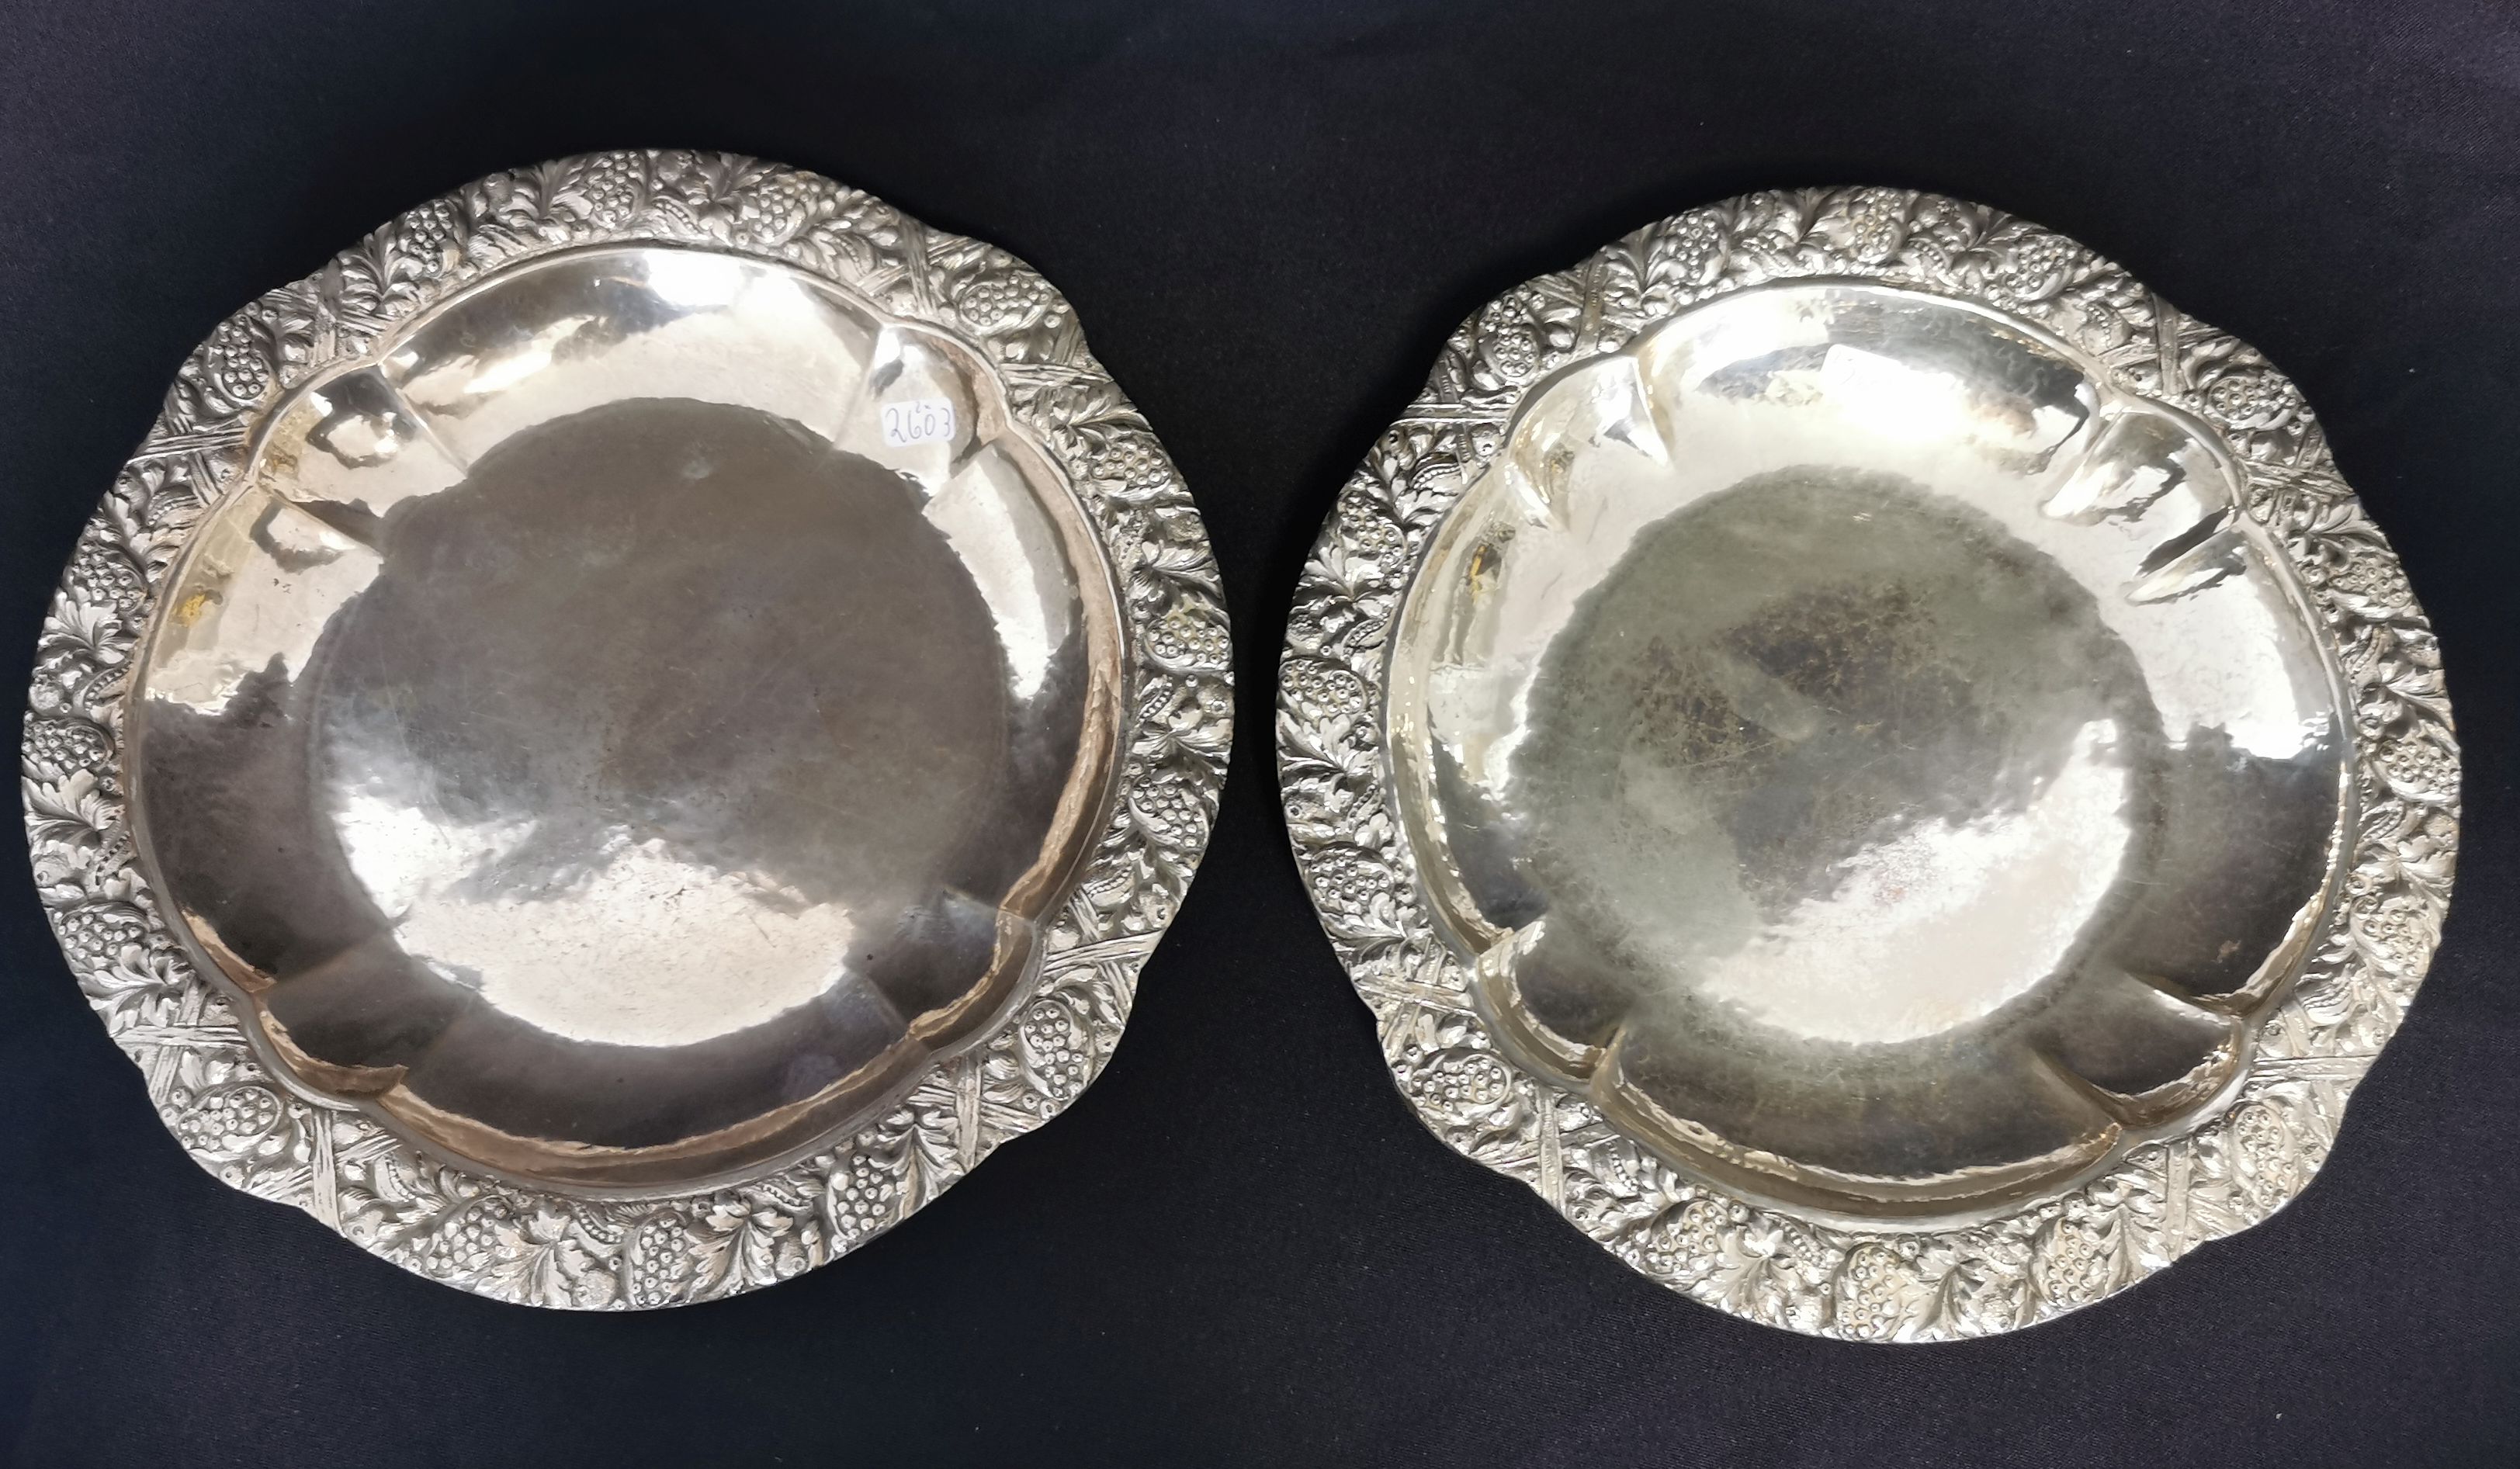 PAIR OF BOWLS WITH RELIEF DECORATION - Image 2 of 4